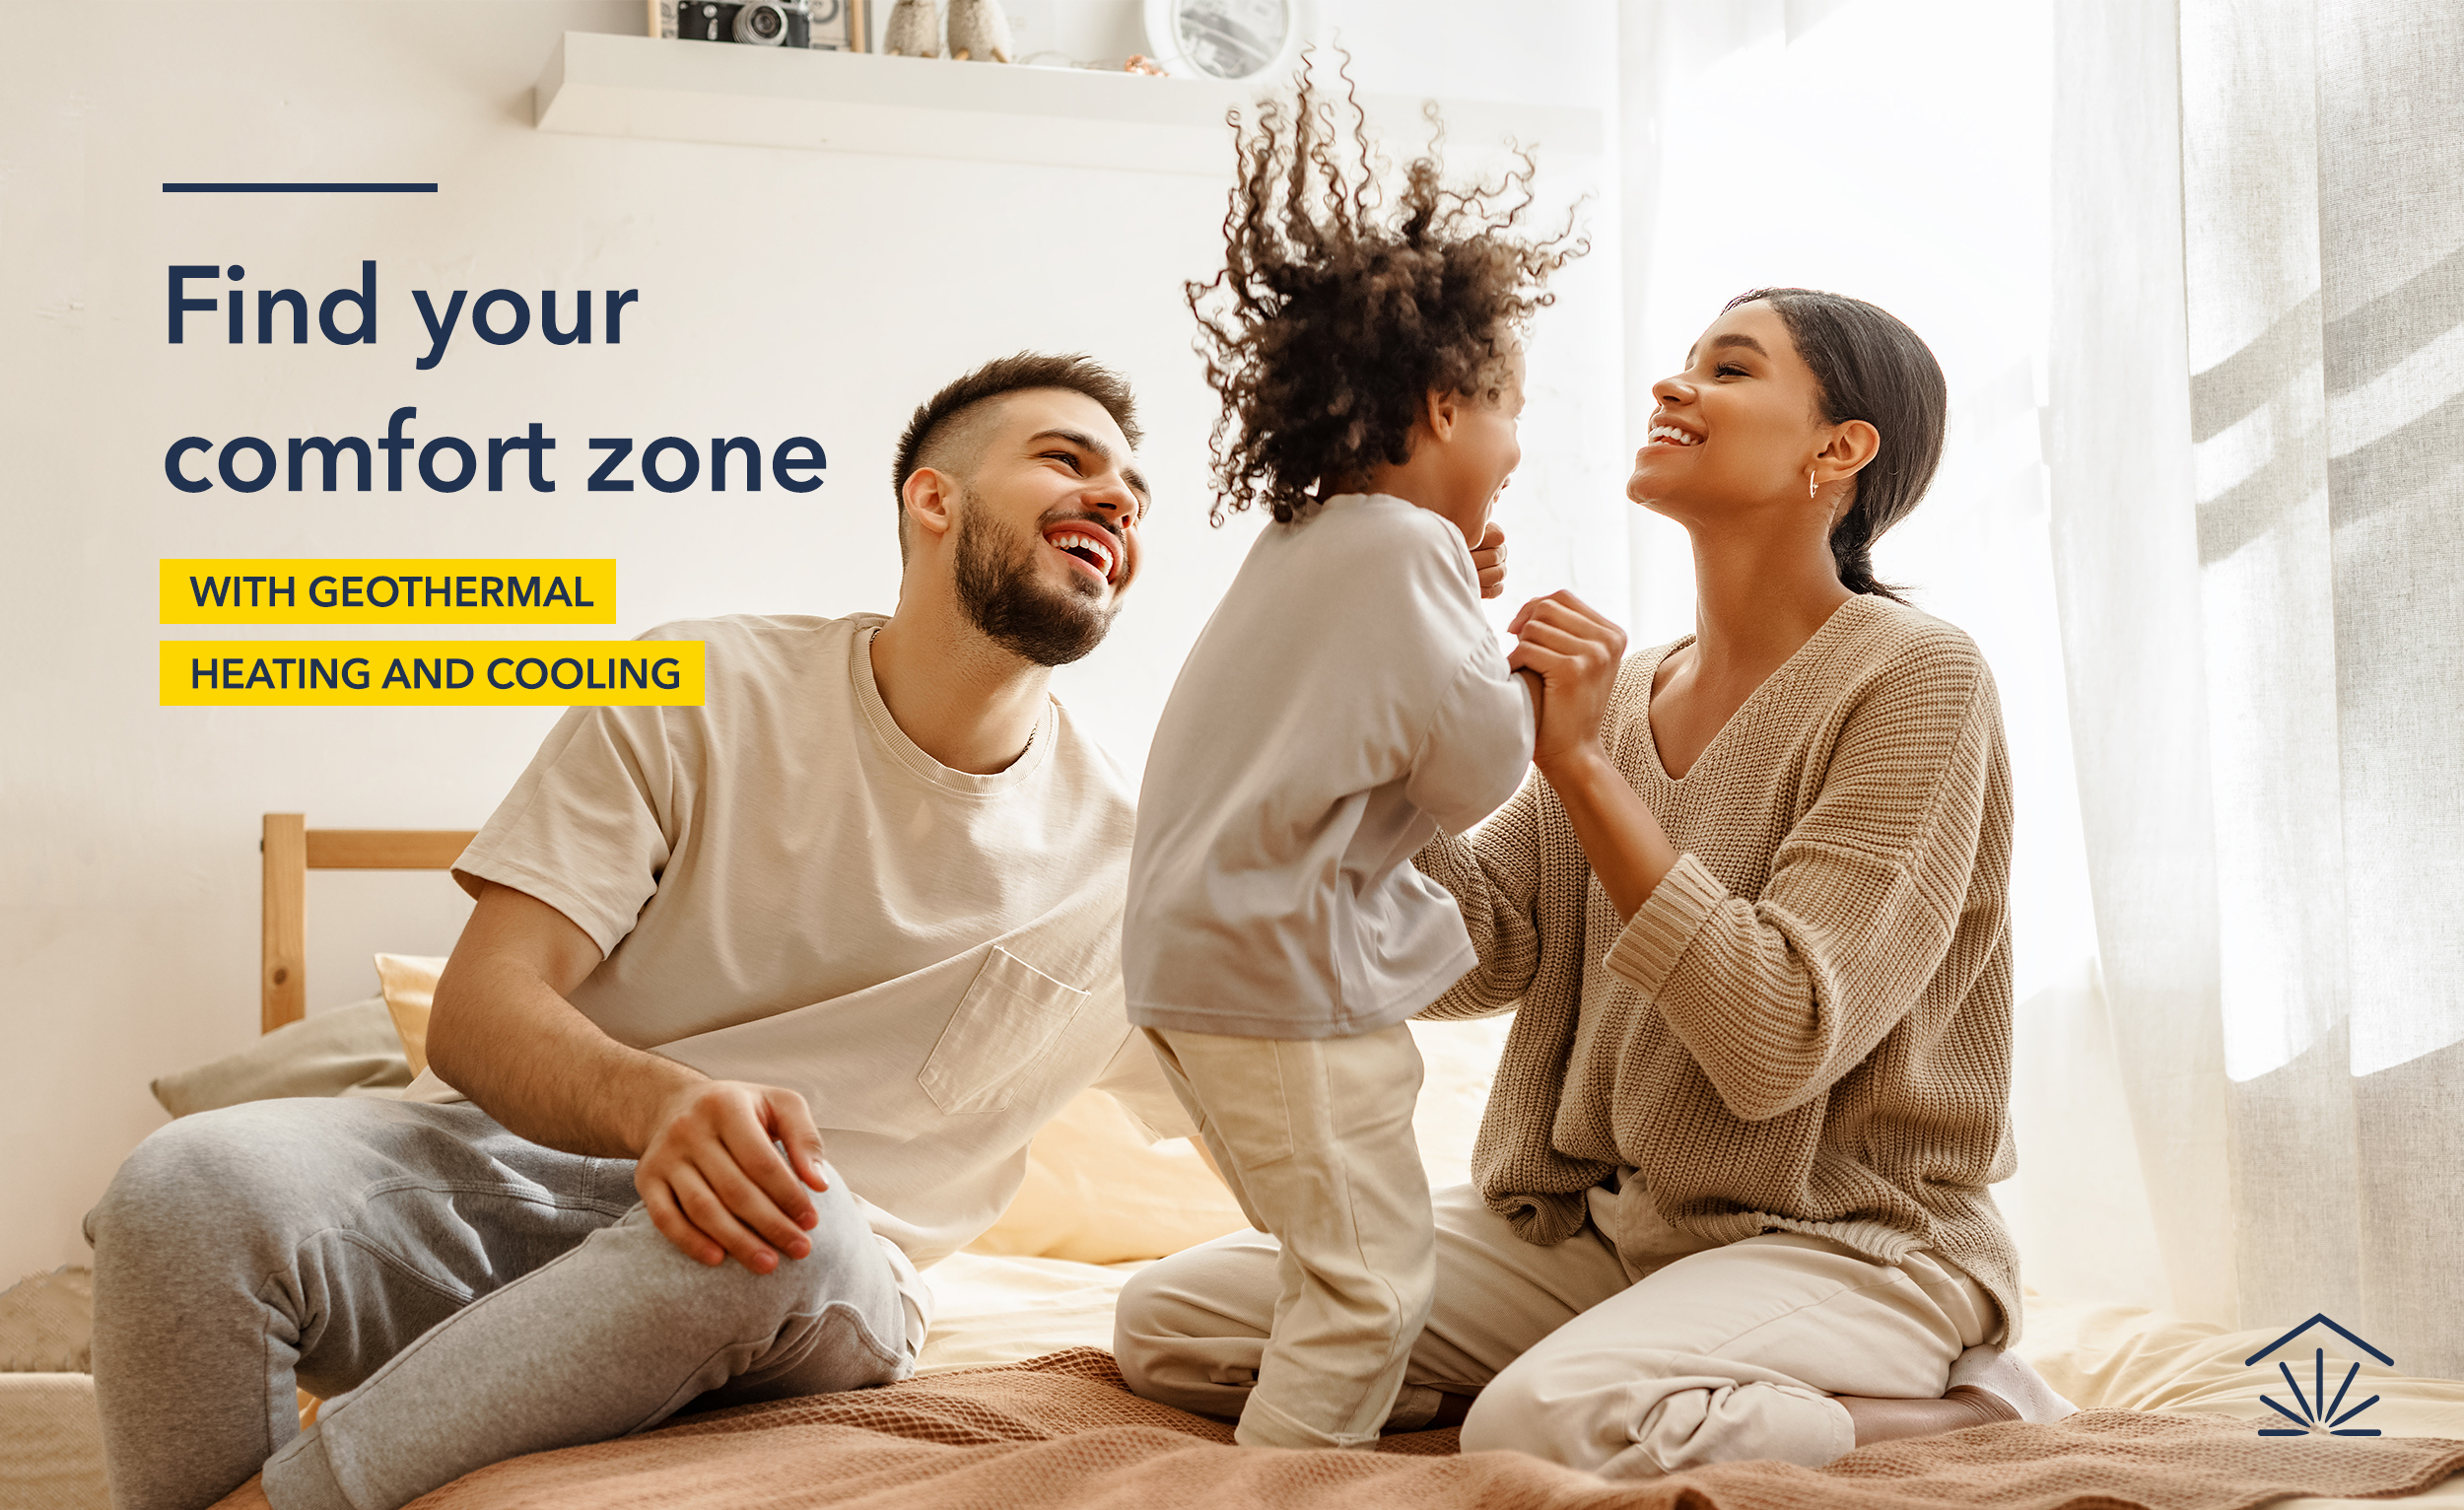 A man, woman, and their child are laughing in a white room. Both members of the couple are LatinX. There is text overlaid that says 'Find your comfort zone with geothermal heating and cooling.'